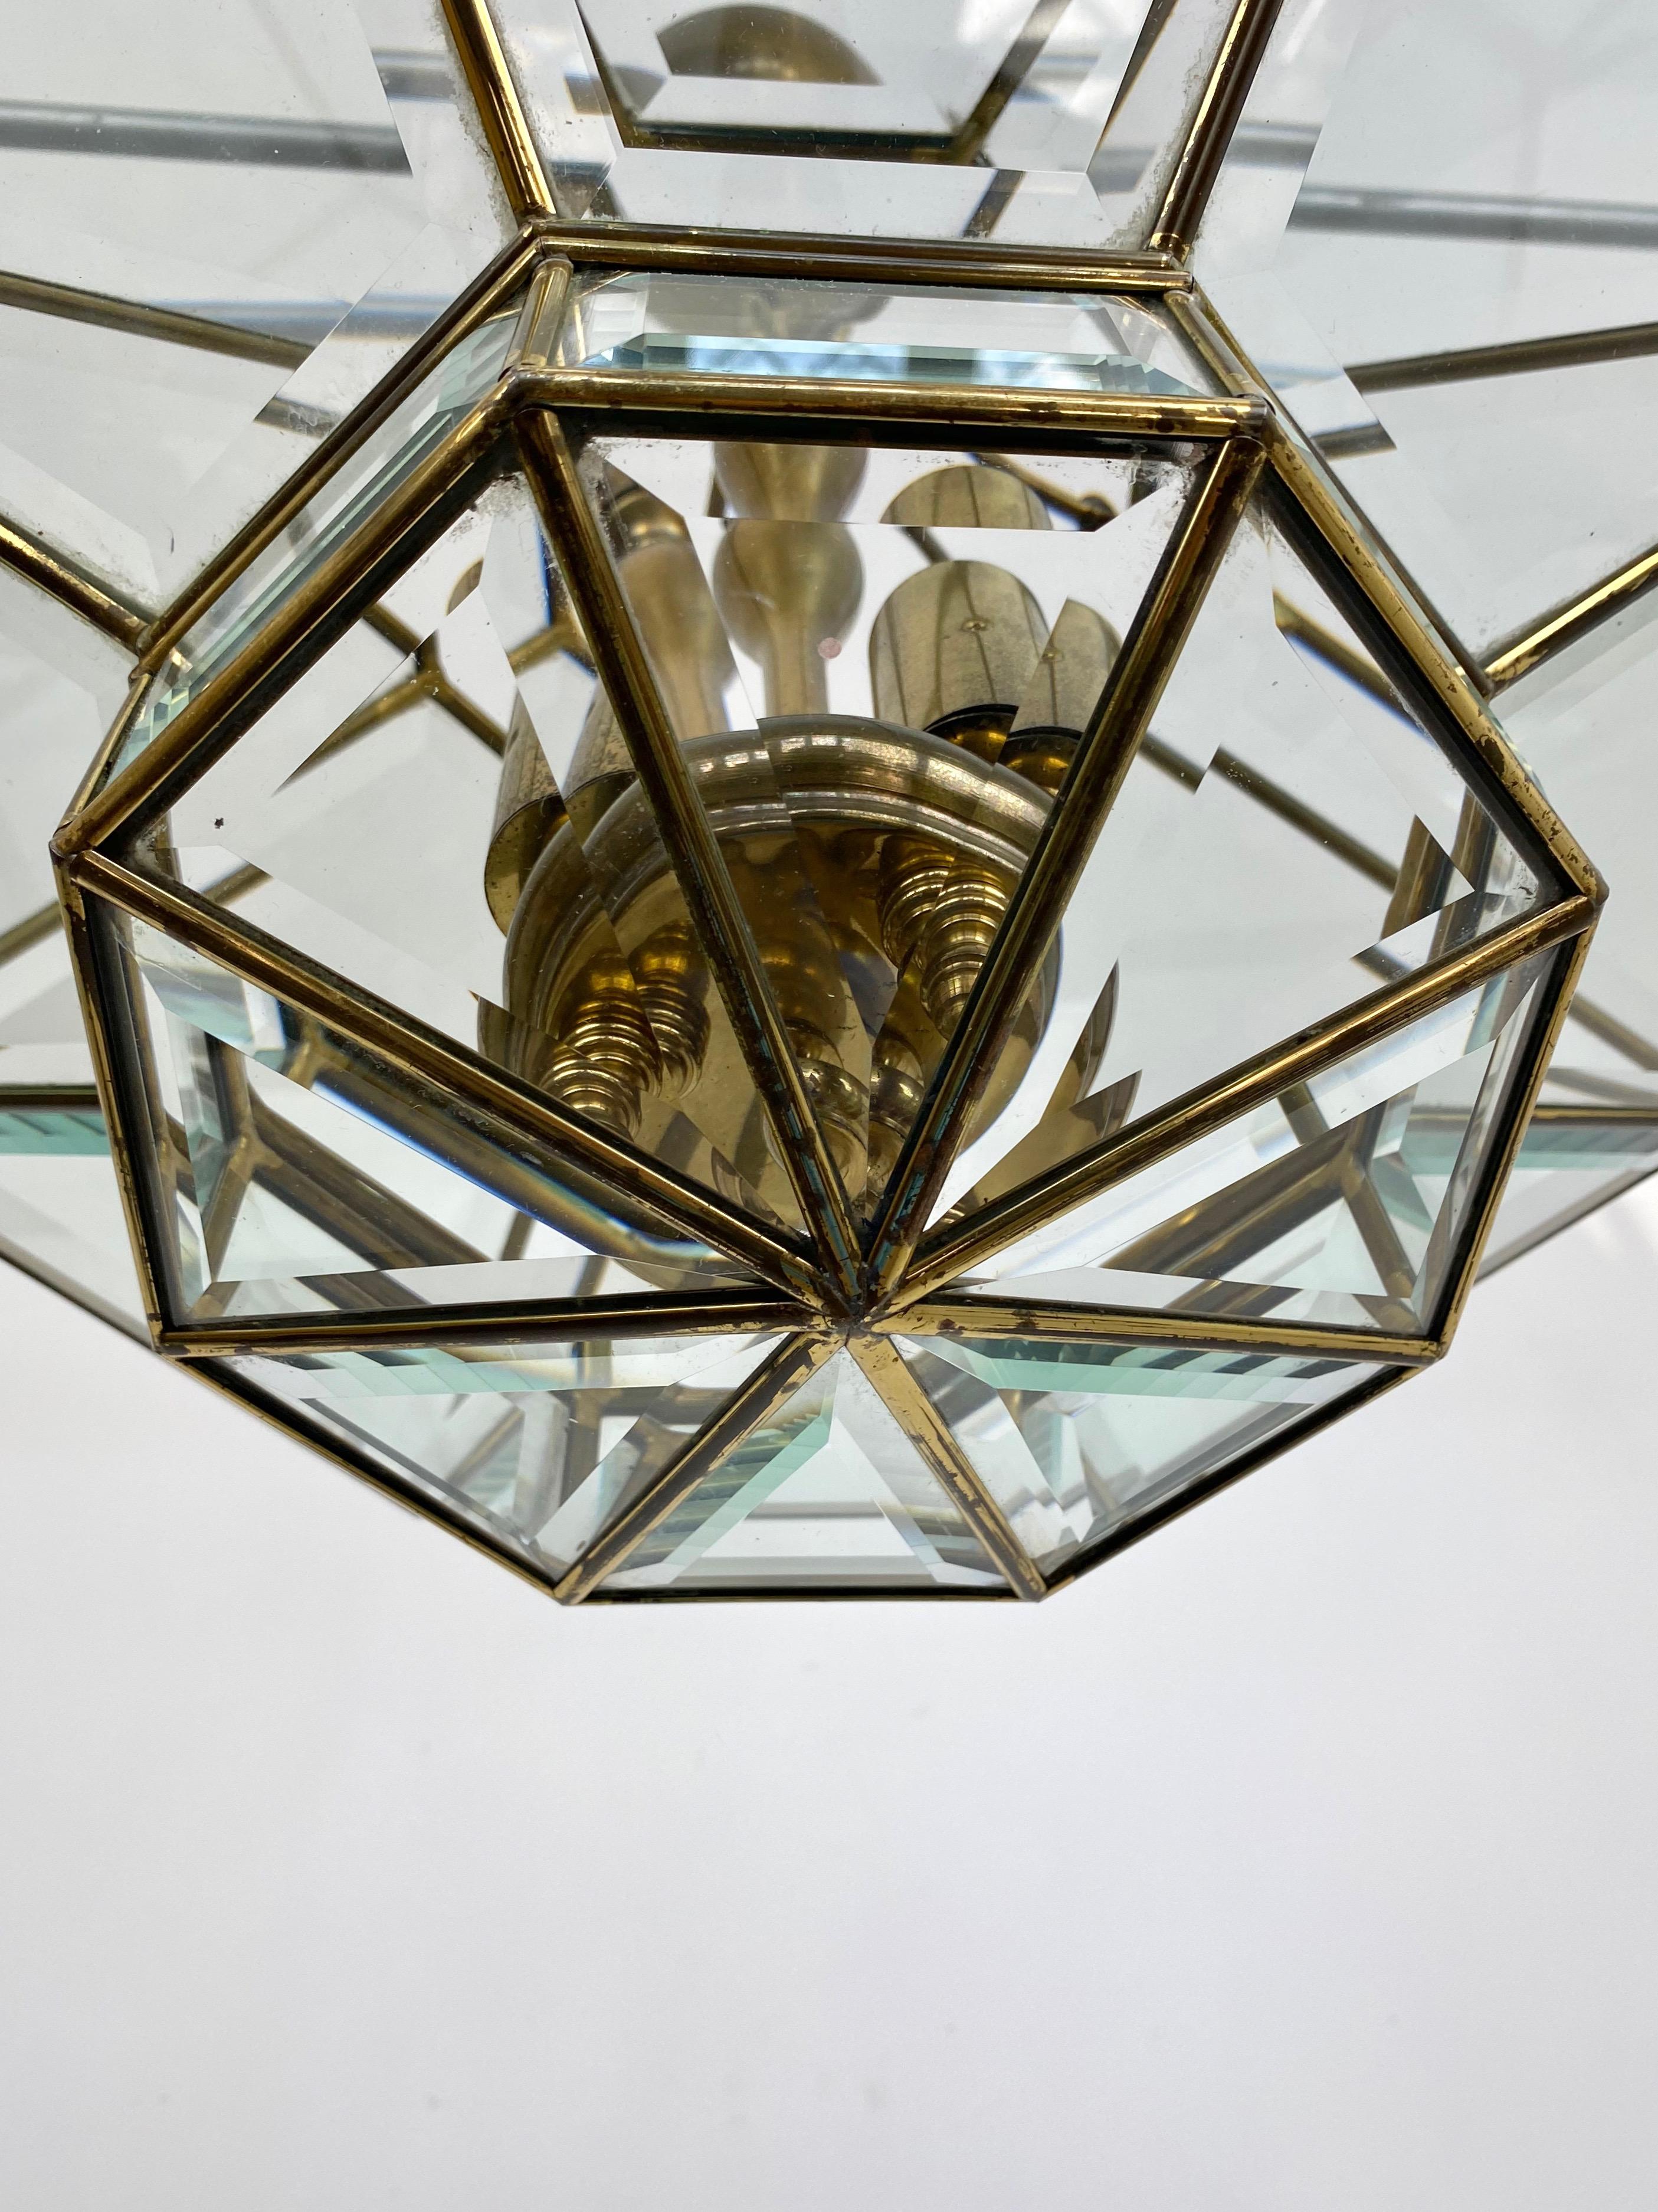 Octagonal Diamond Chandelier Lantern Brass and Glass Fontana Arte Style, Italy In Good Condition For Sale In Rome, IT